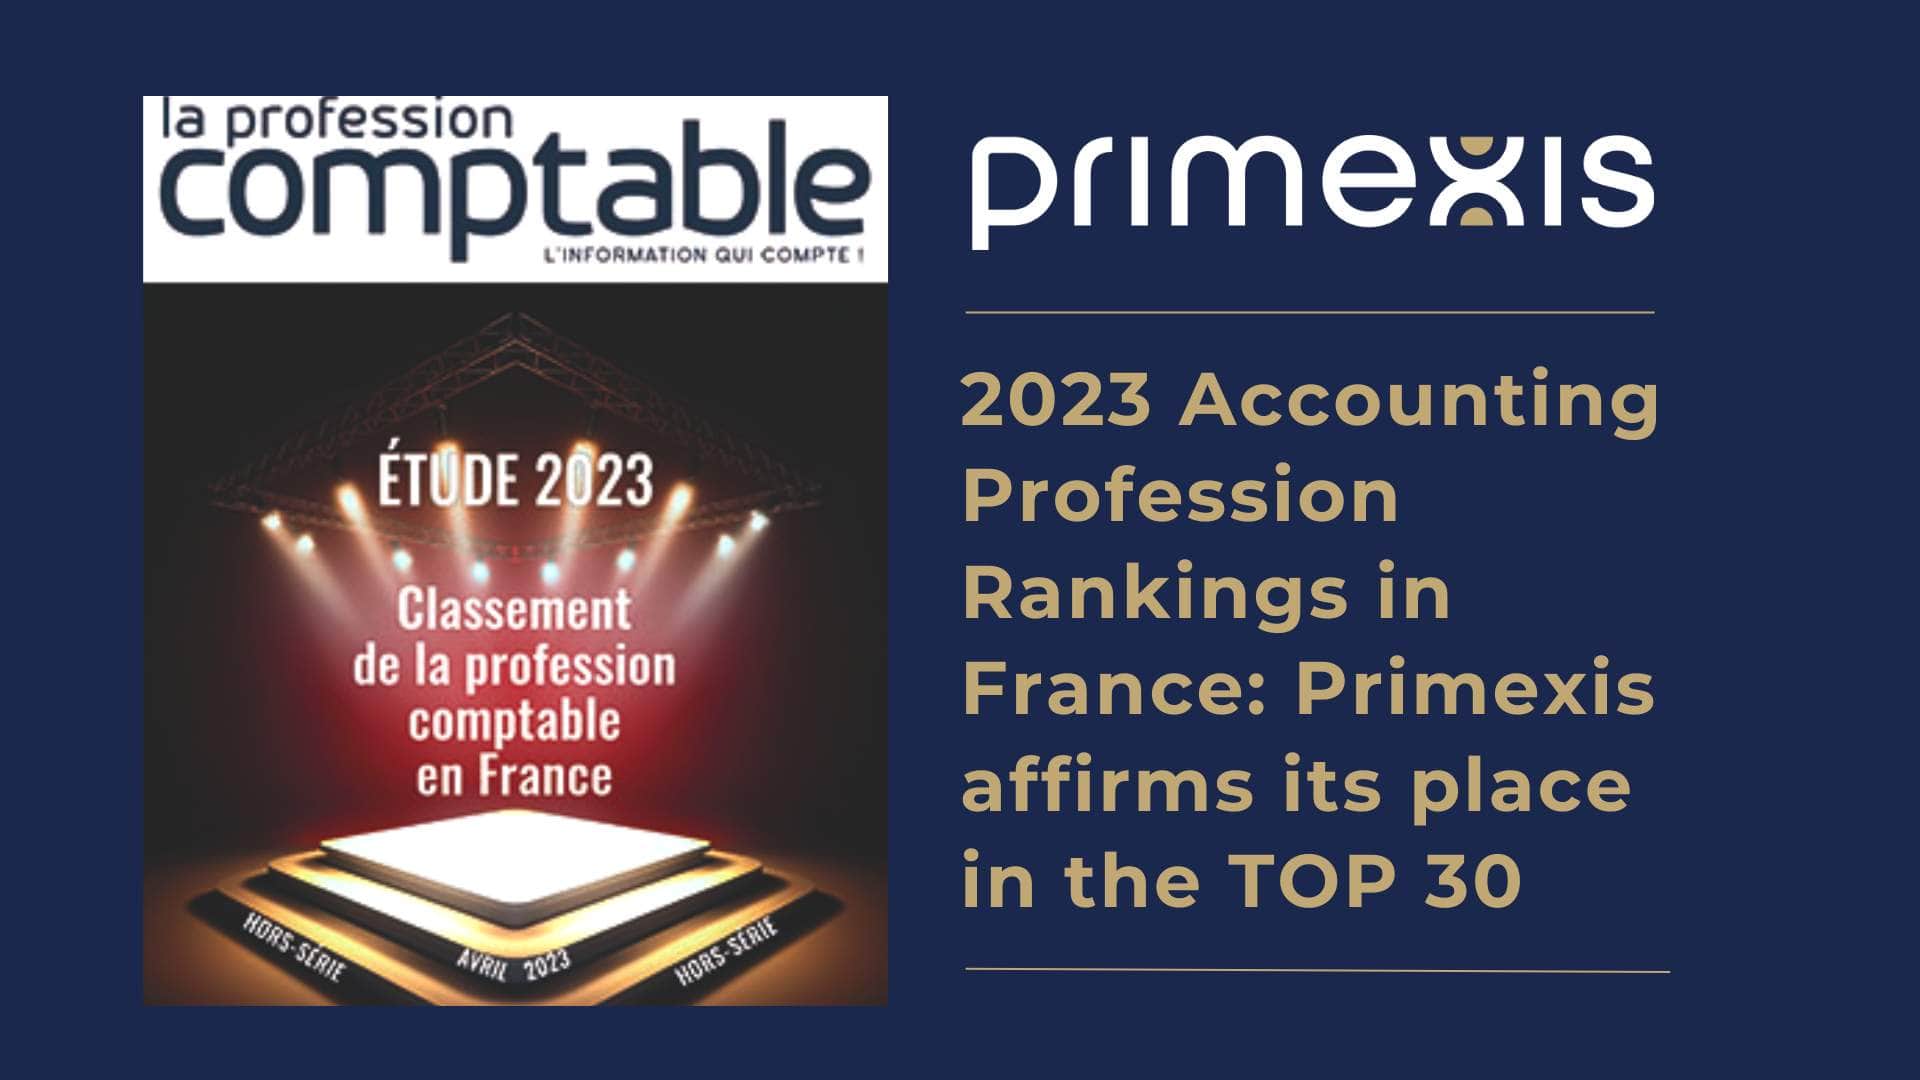 2023 Accounting Profession Rankings: Primexis affirms its place in the TOP 30 